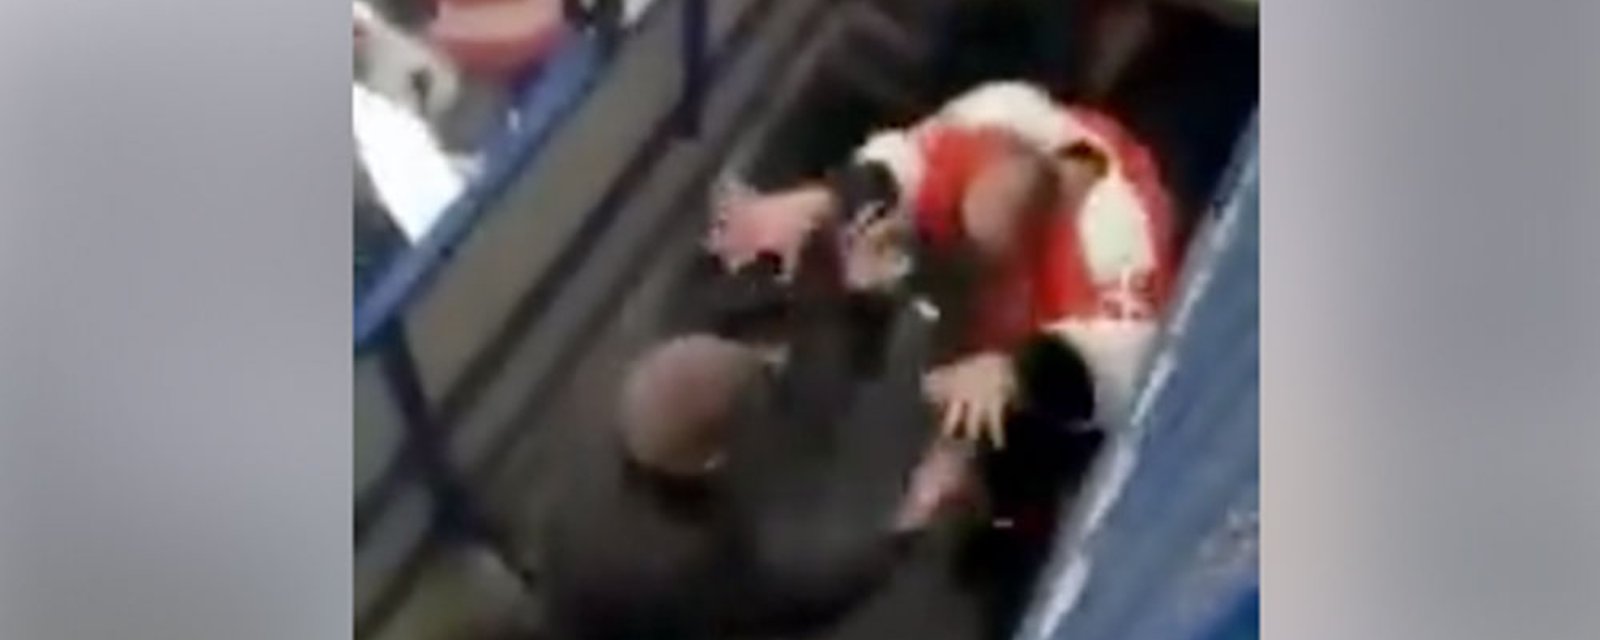 Fans attack players on the bench in crazy Russian hockey brawl